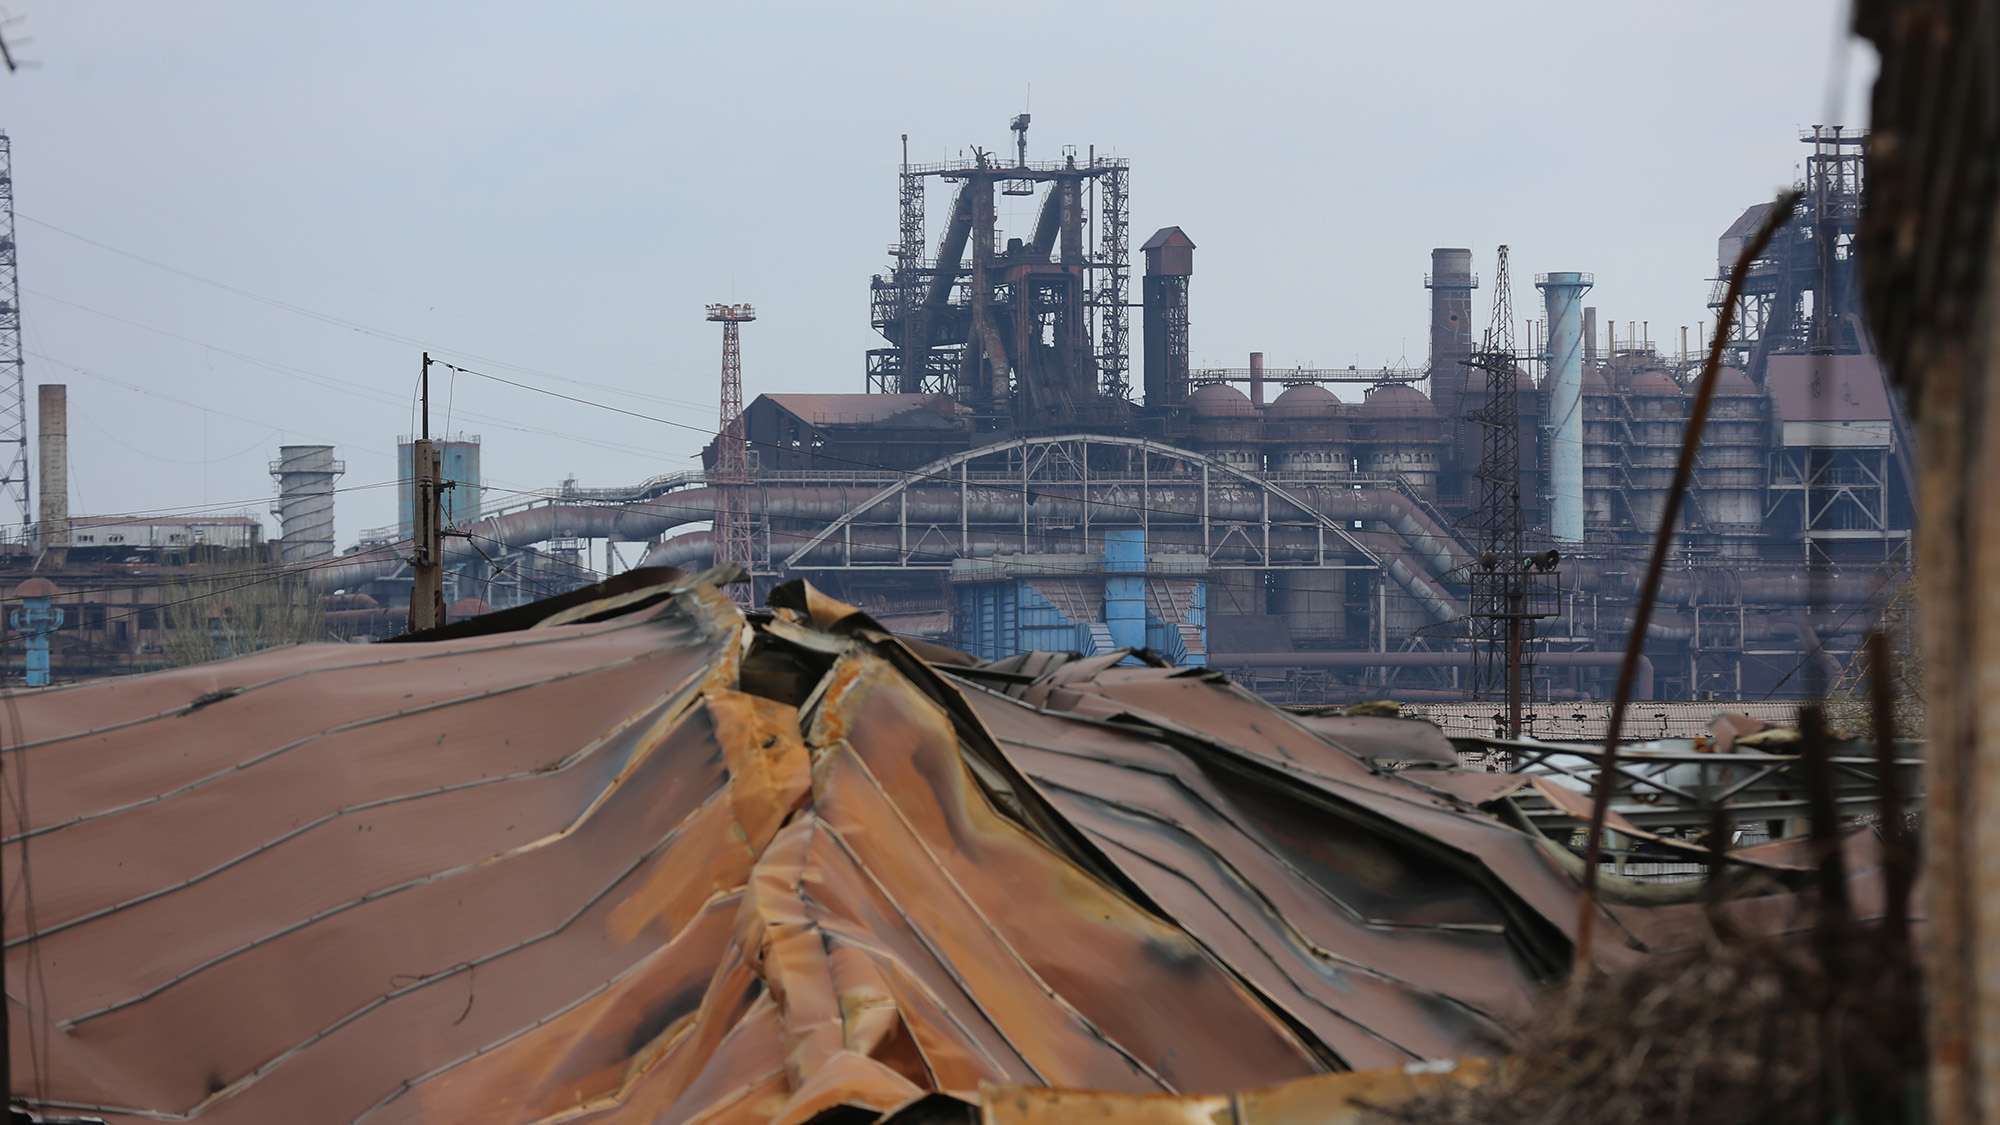 The Azovstal steel plant in Mariupol, Ukraine is seen on April 22.